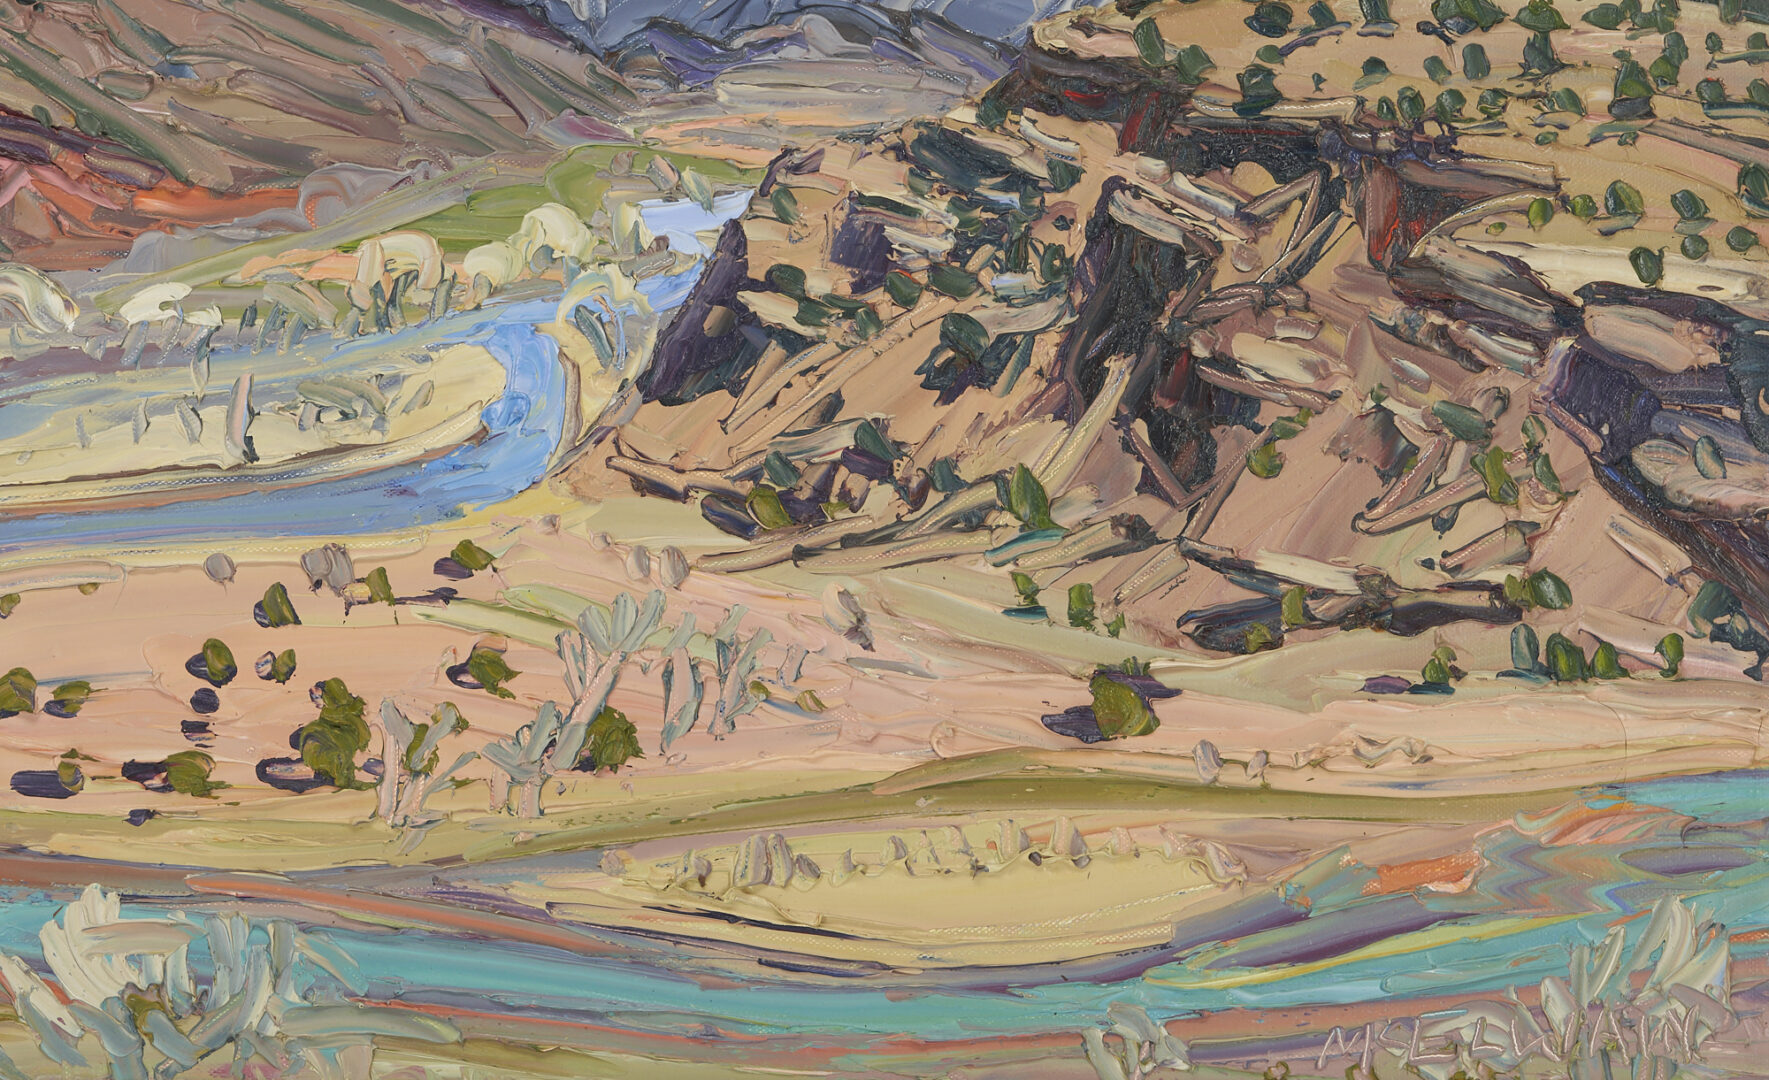 Lot 509: Louisa McElwain O/C New Mexico Landscape, The Chama Valley, Abiquiu